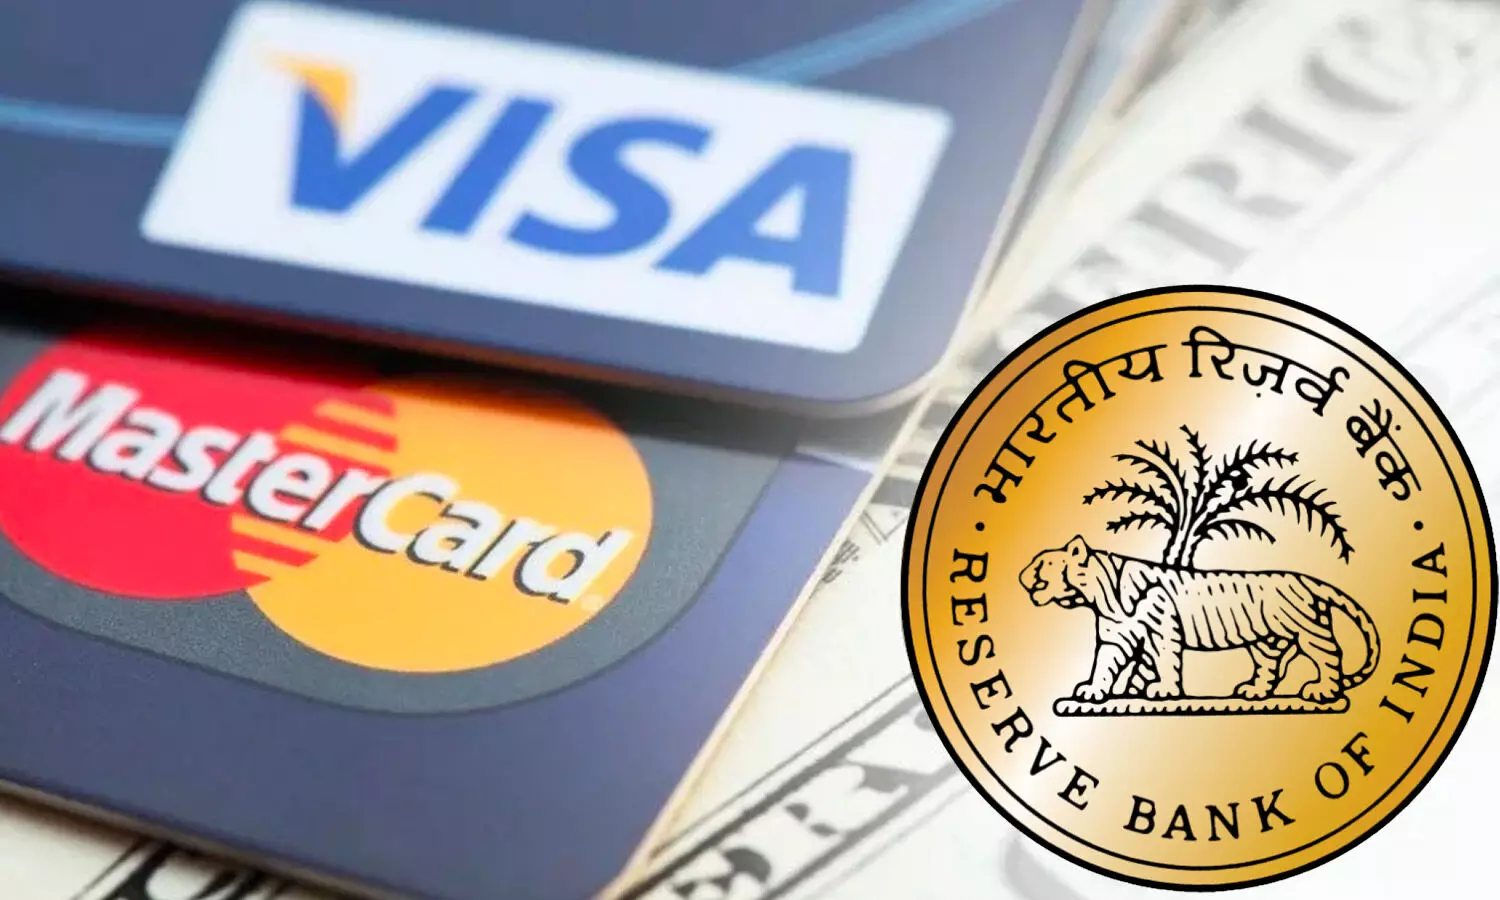 RBI’s new directives to banks regarding credit cards, benefits customers